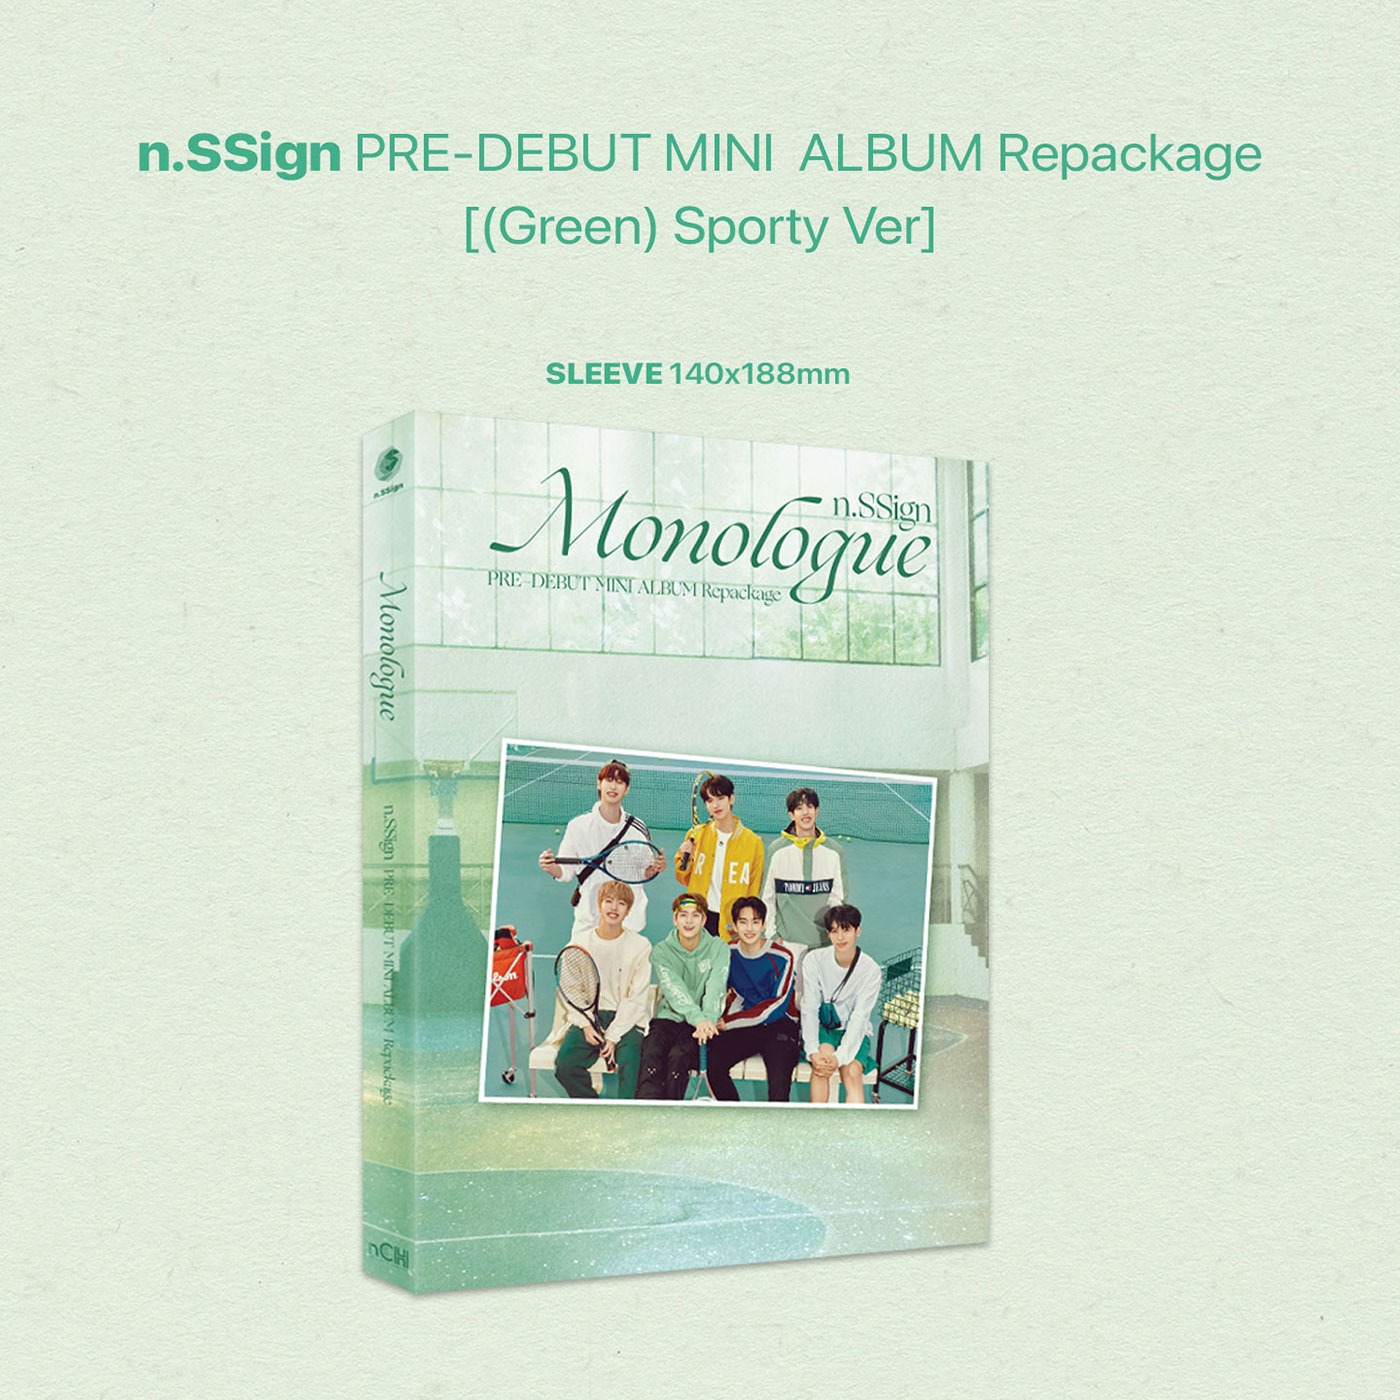 Monologue : PRE-DEBUT MINI ALBUM Repackage [(Green) Sporty Ver] - official  Kgoods